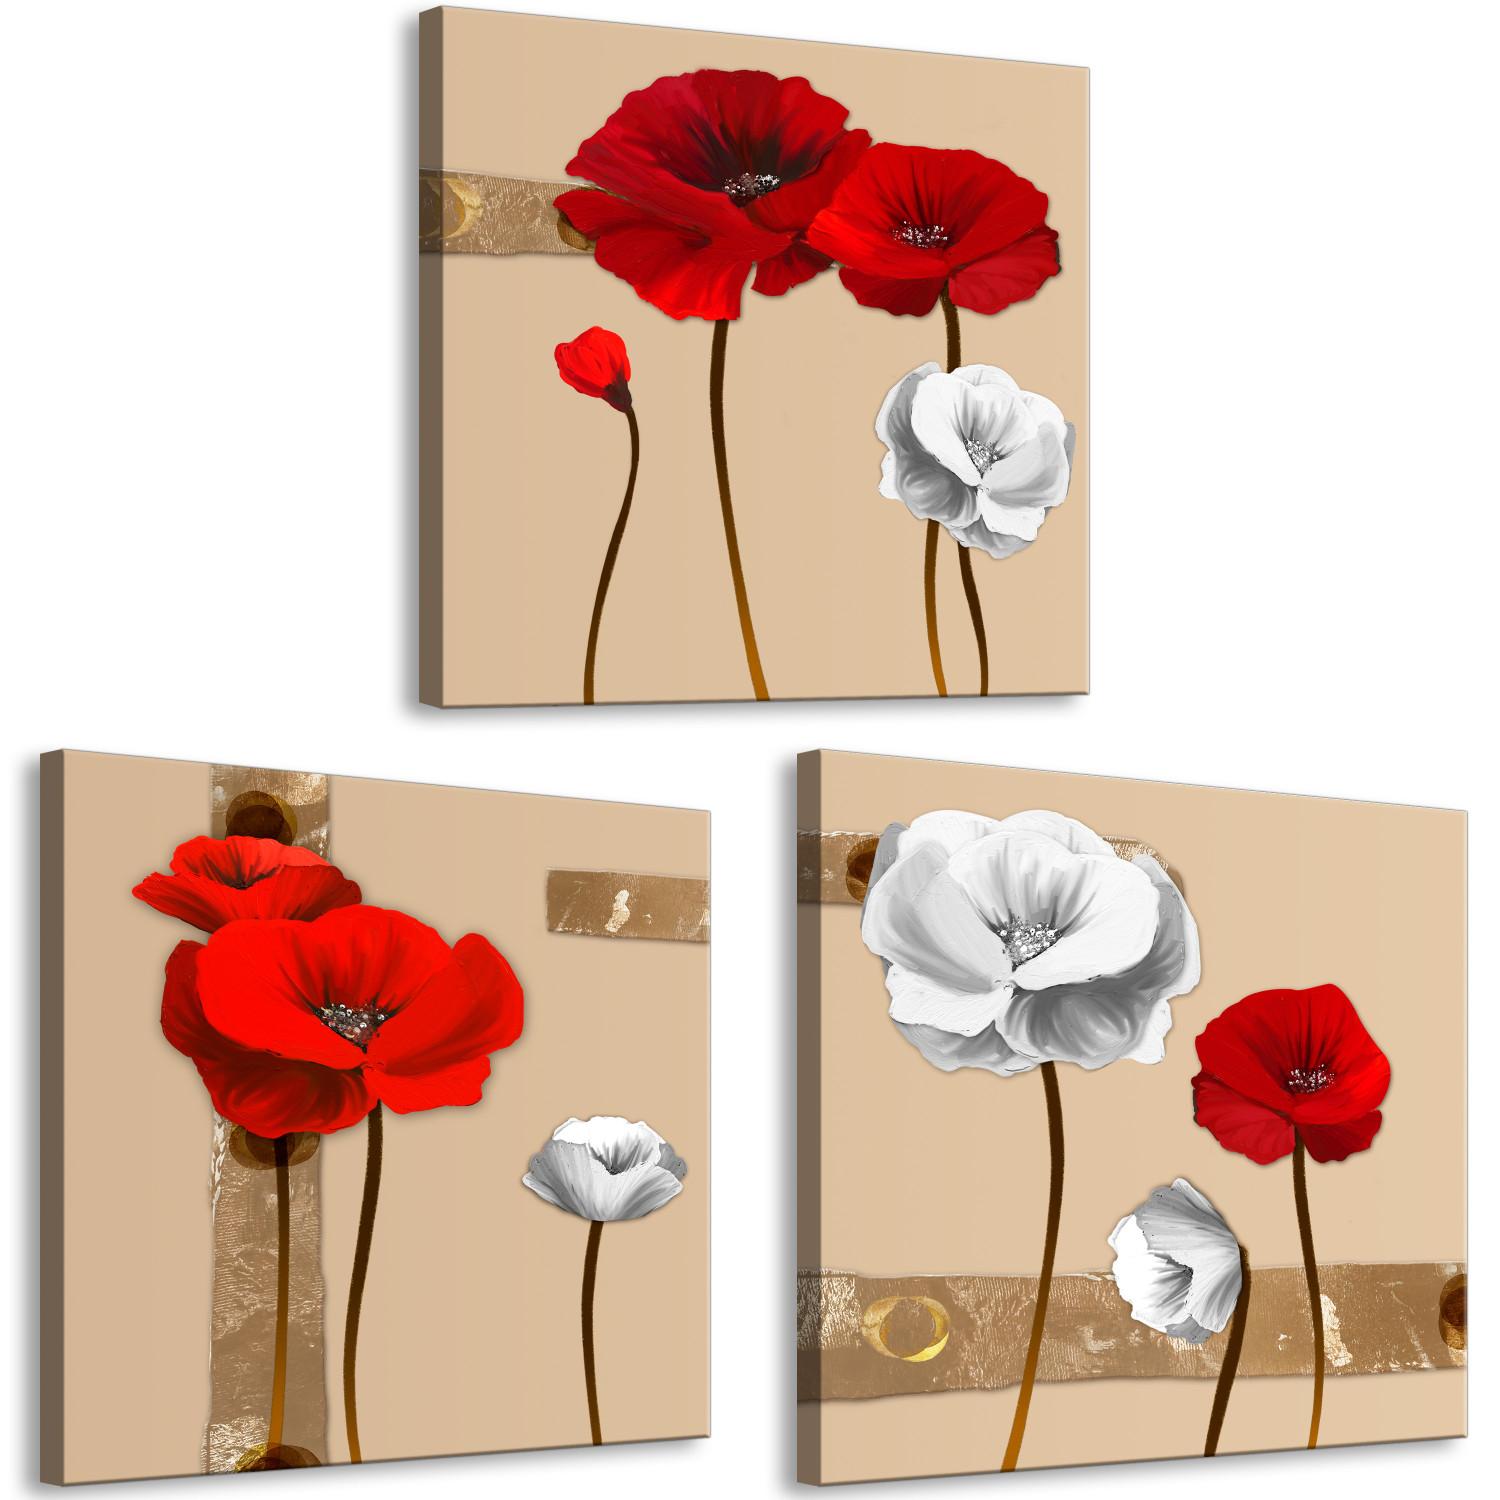 Canvas White and red poppies - triptych with flowers on a brown background